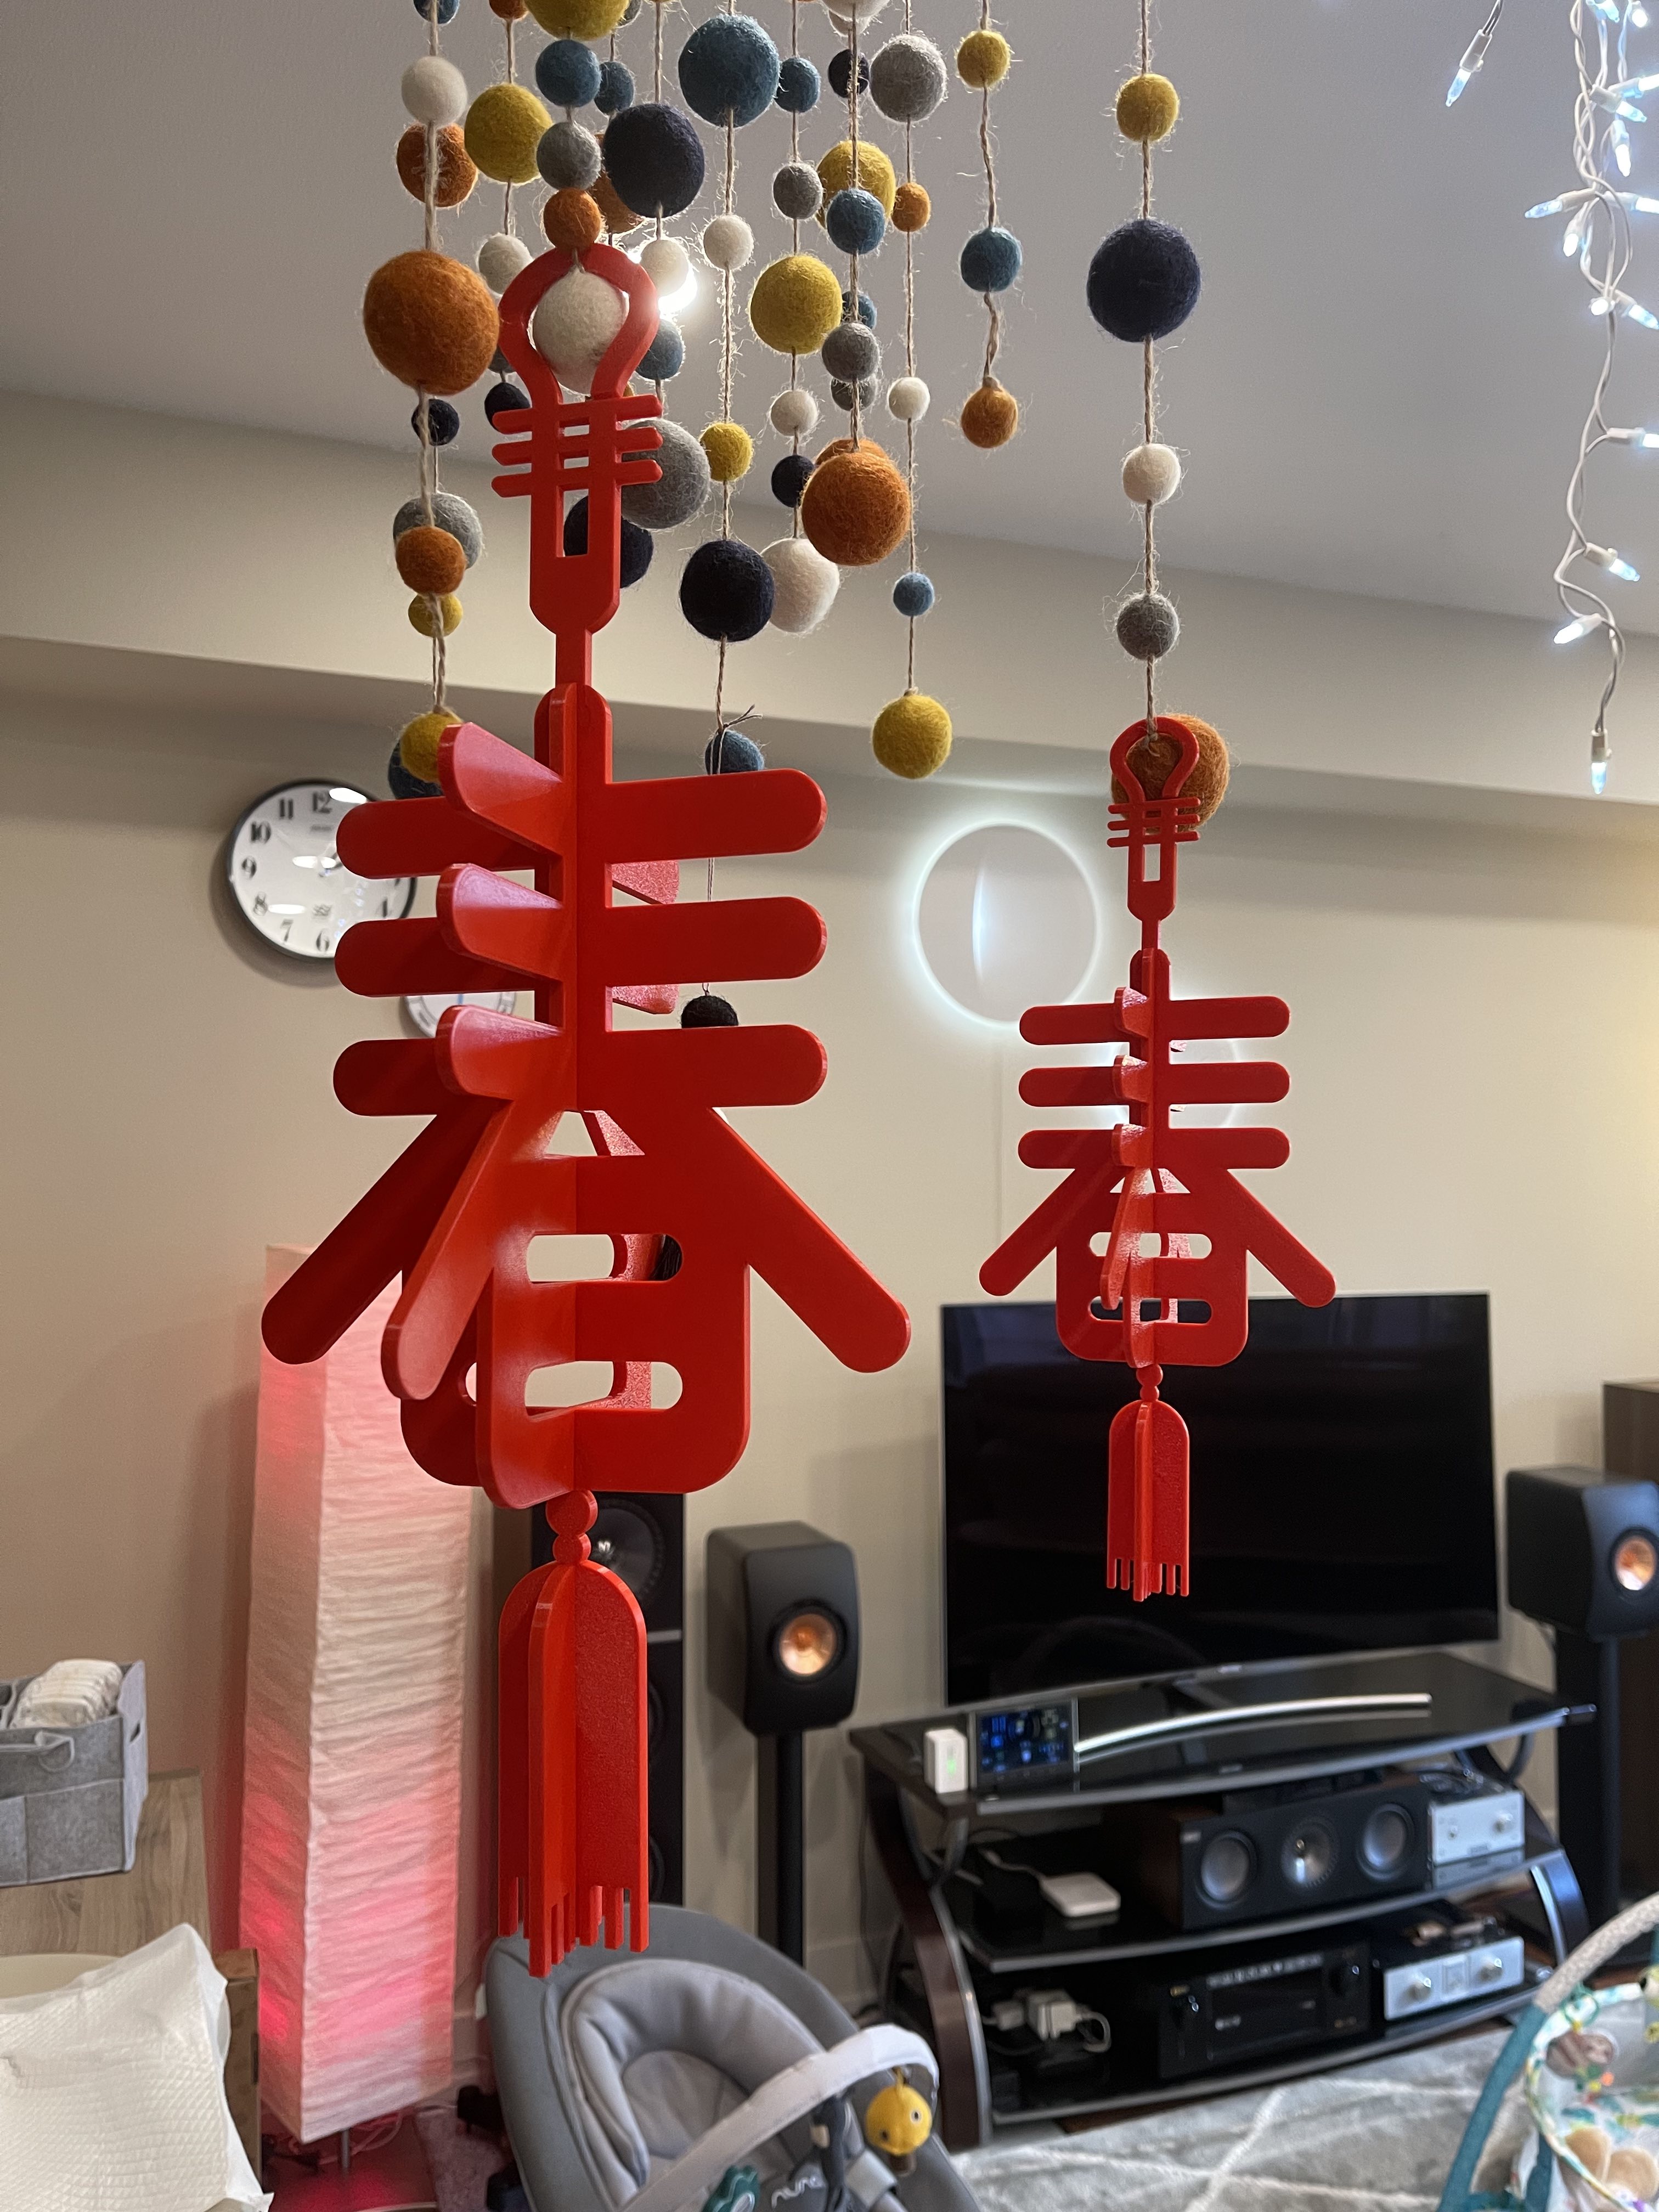 Chinese new year decorations 春